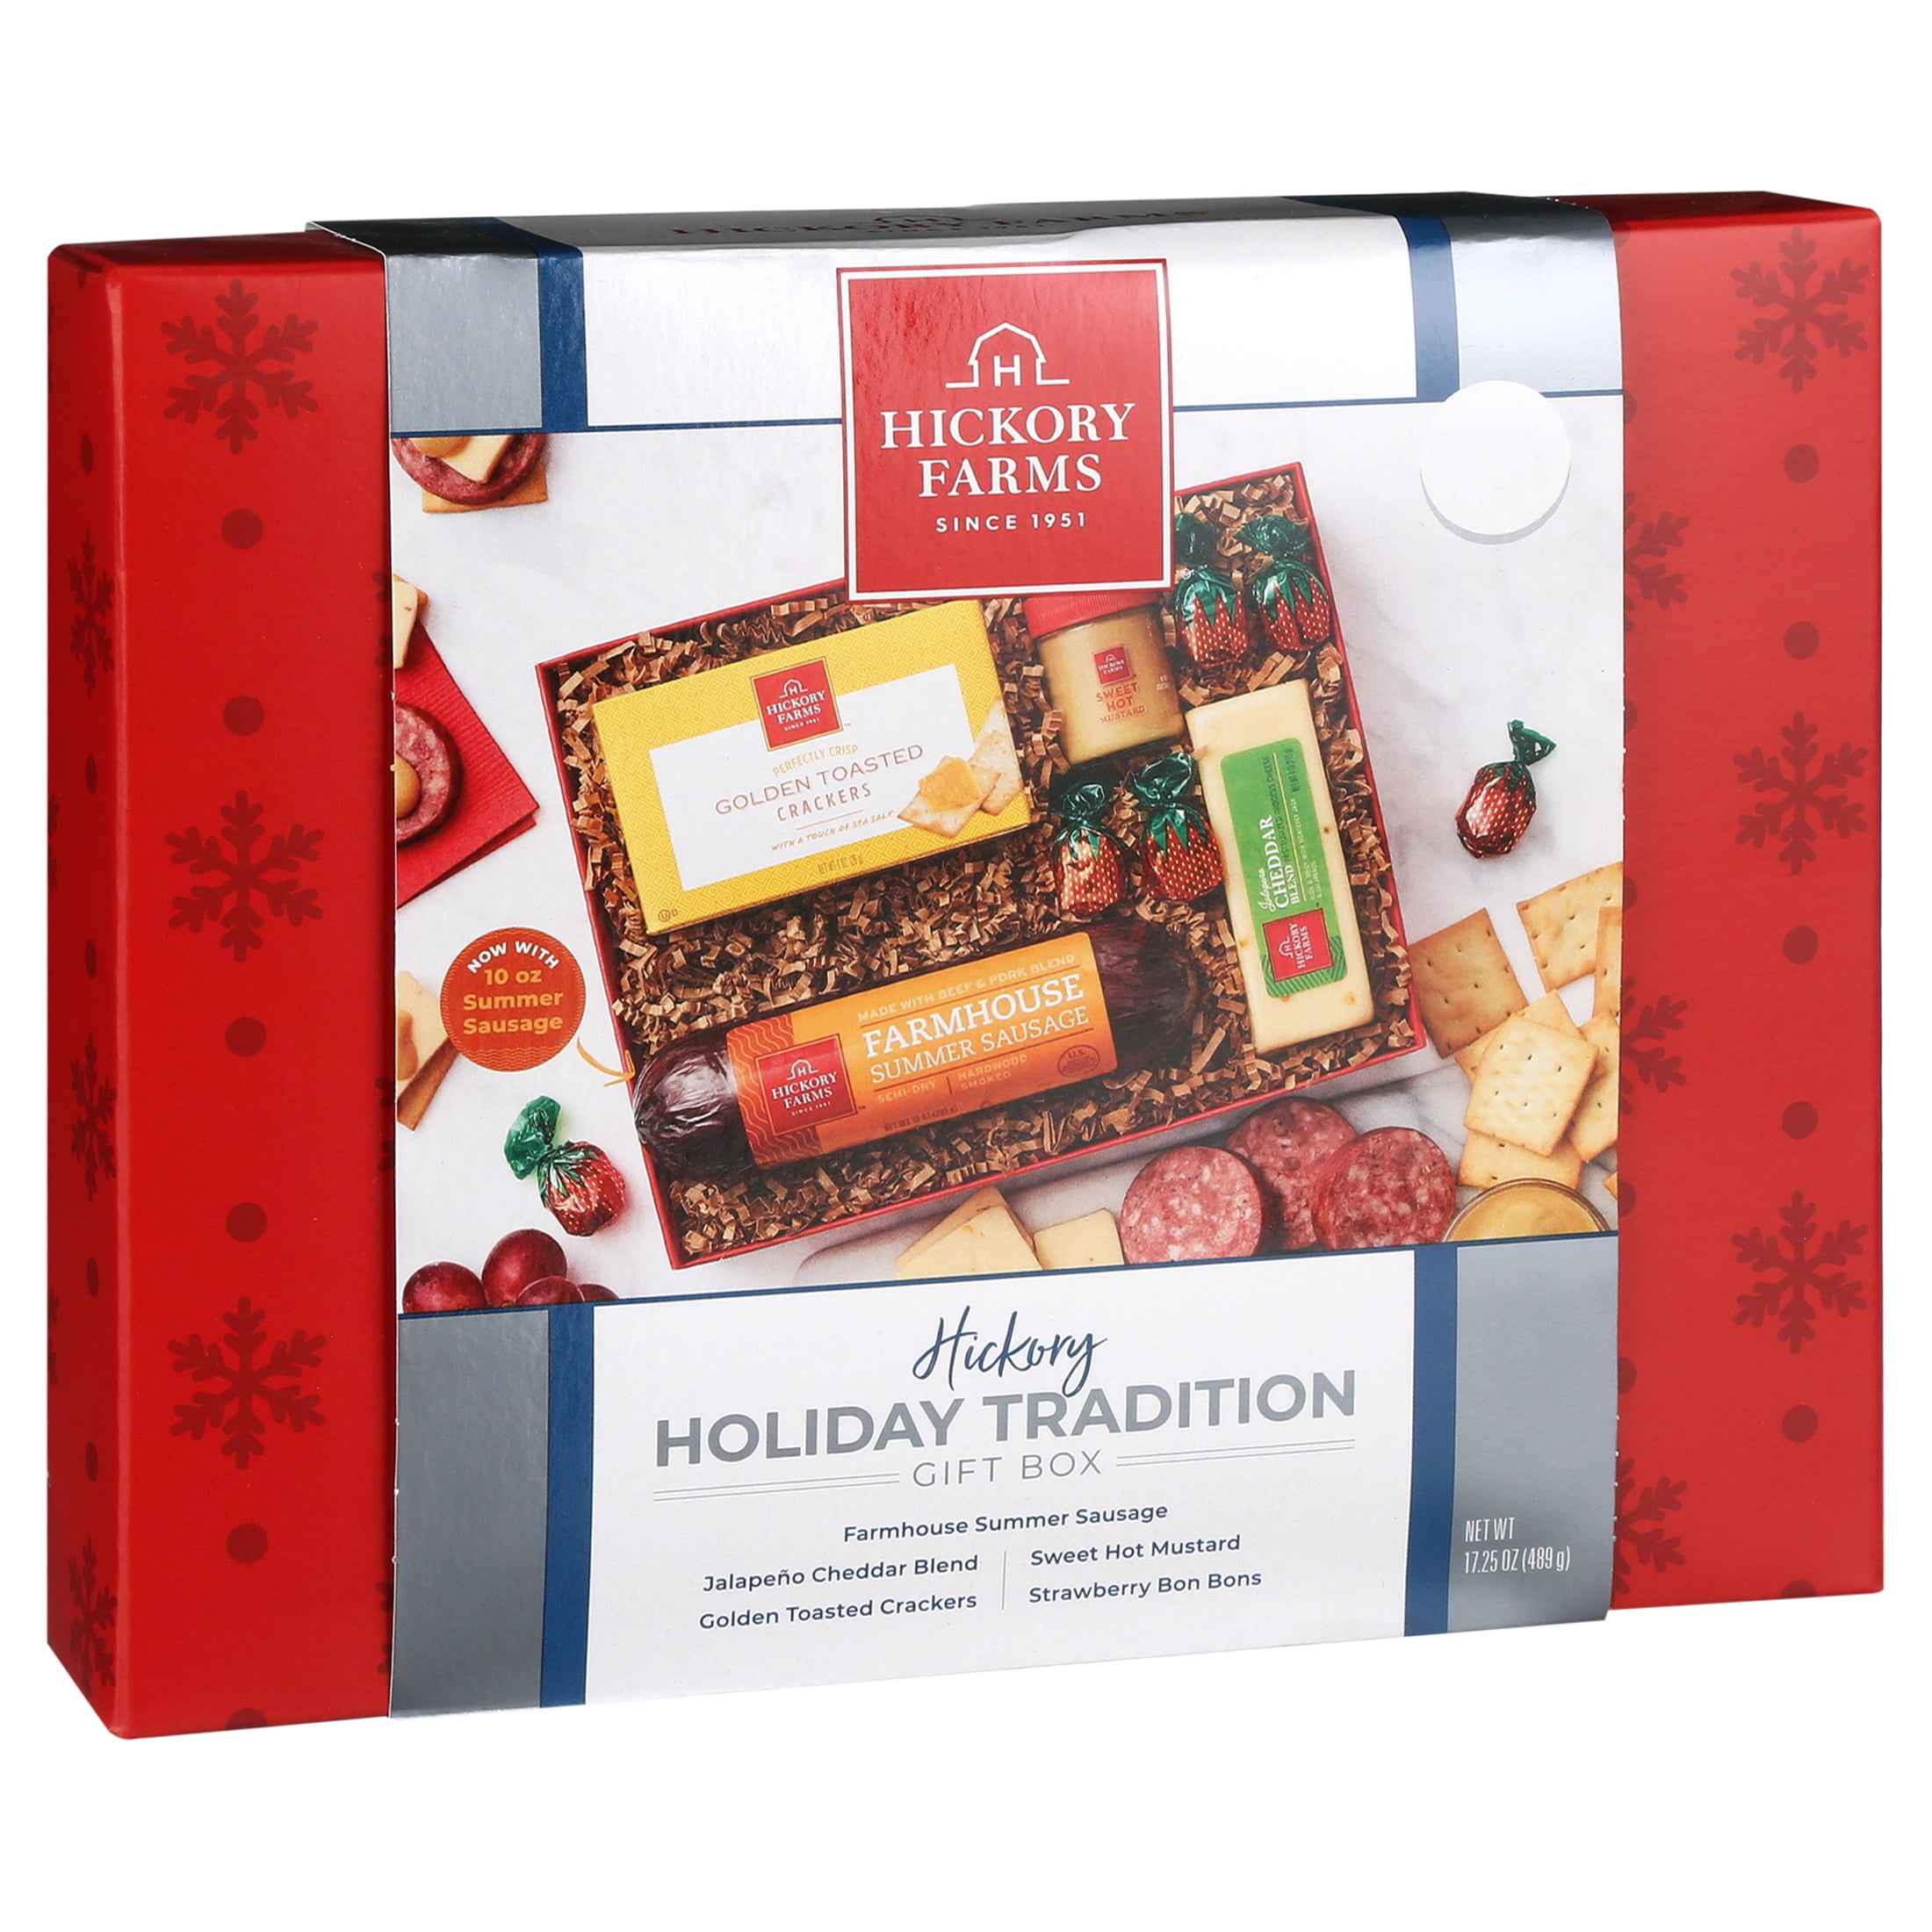 Hickory Farms, a holiday - The Shoppes at Buckland Hills